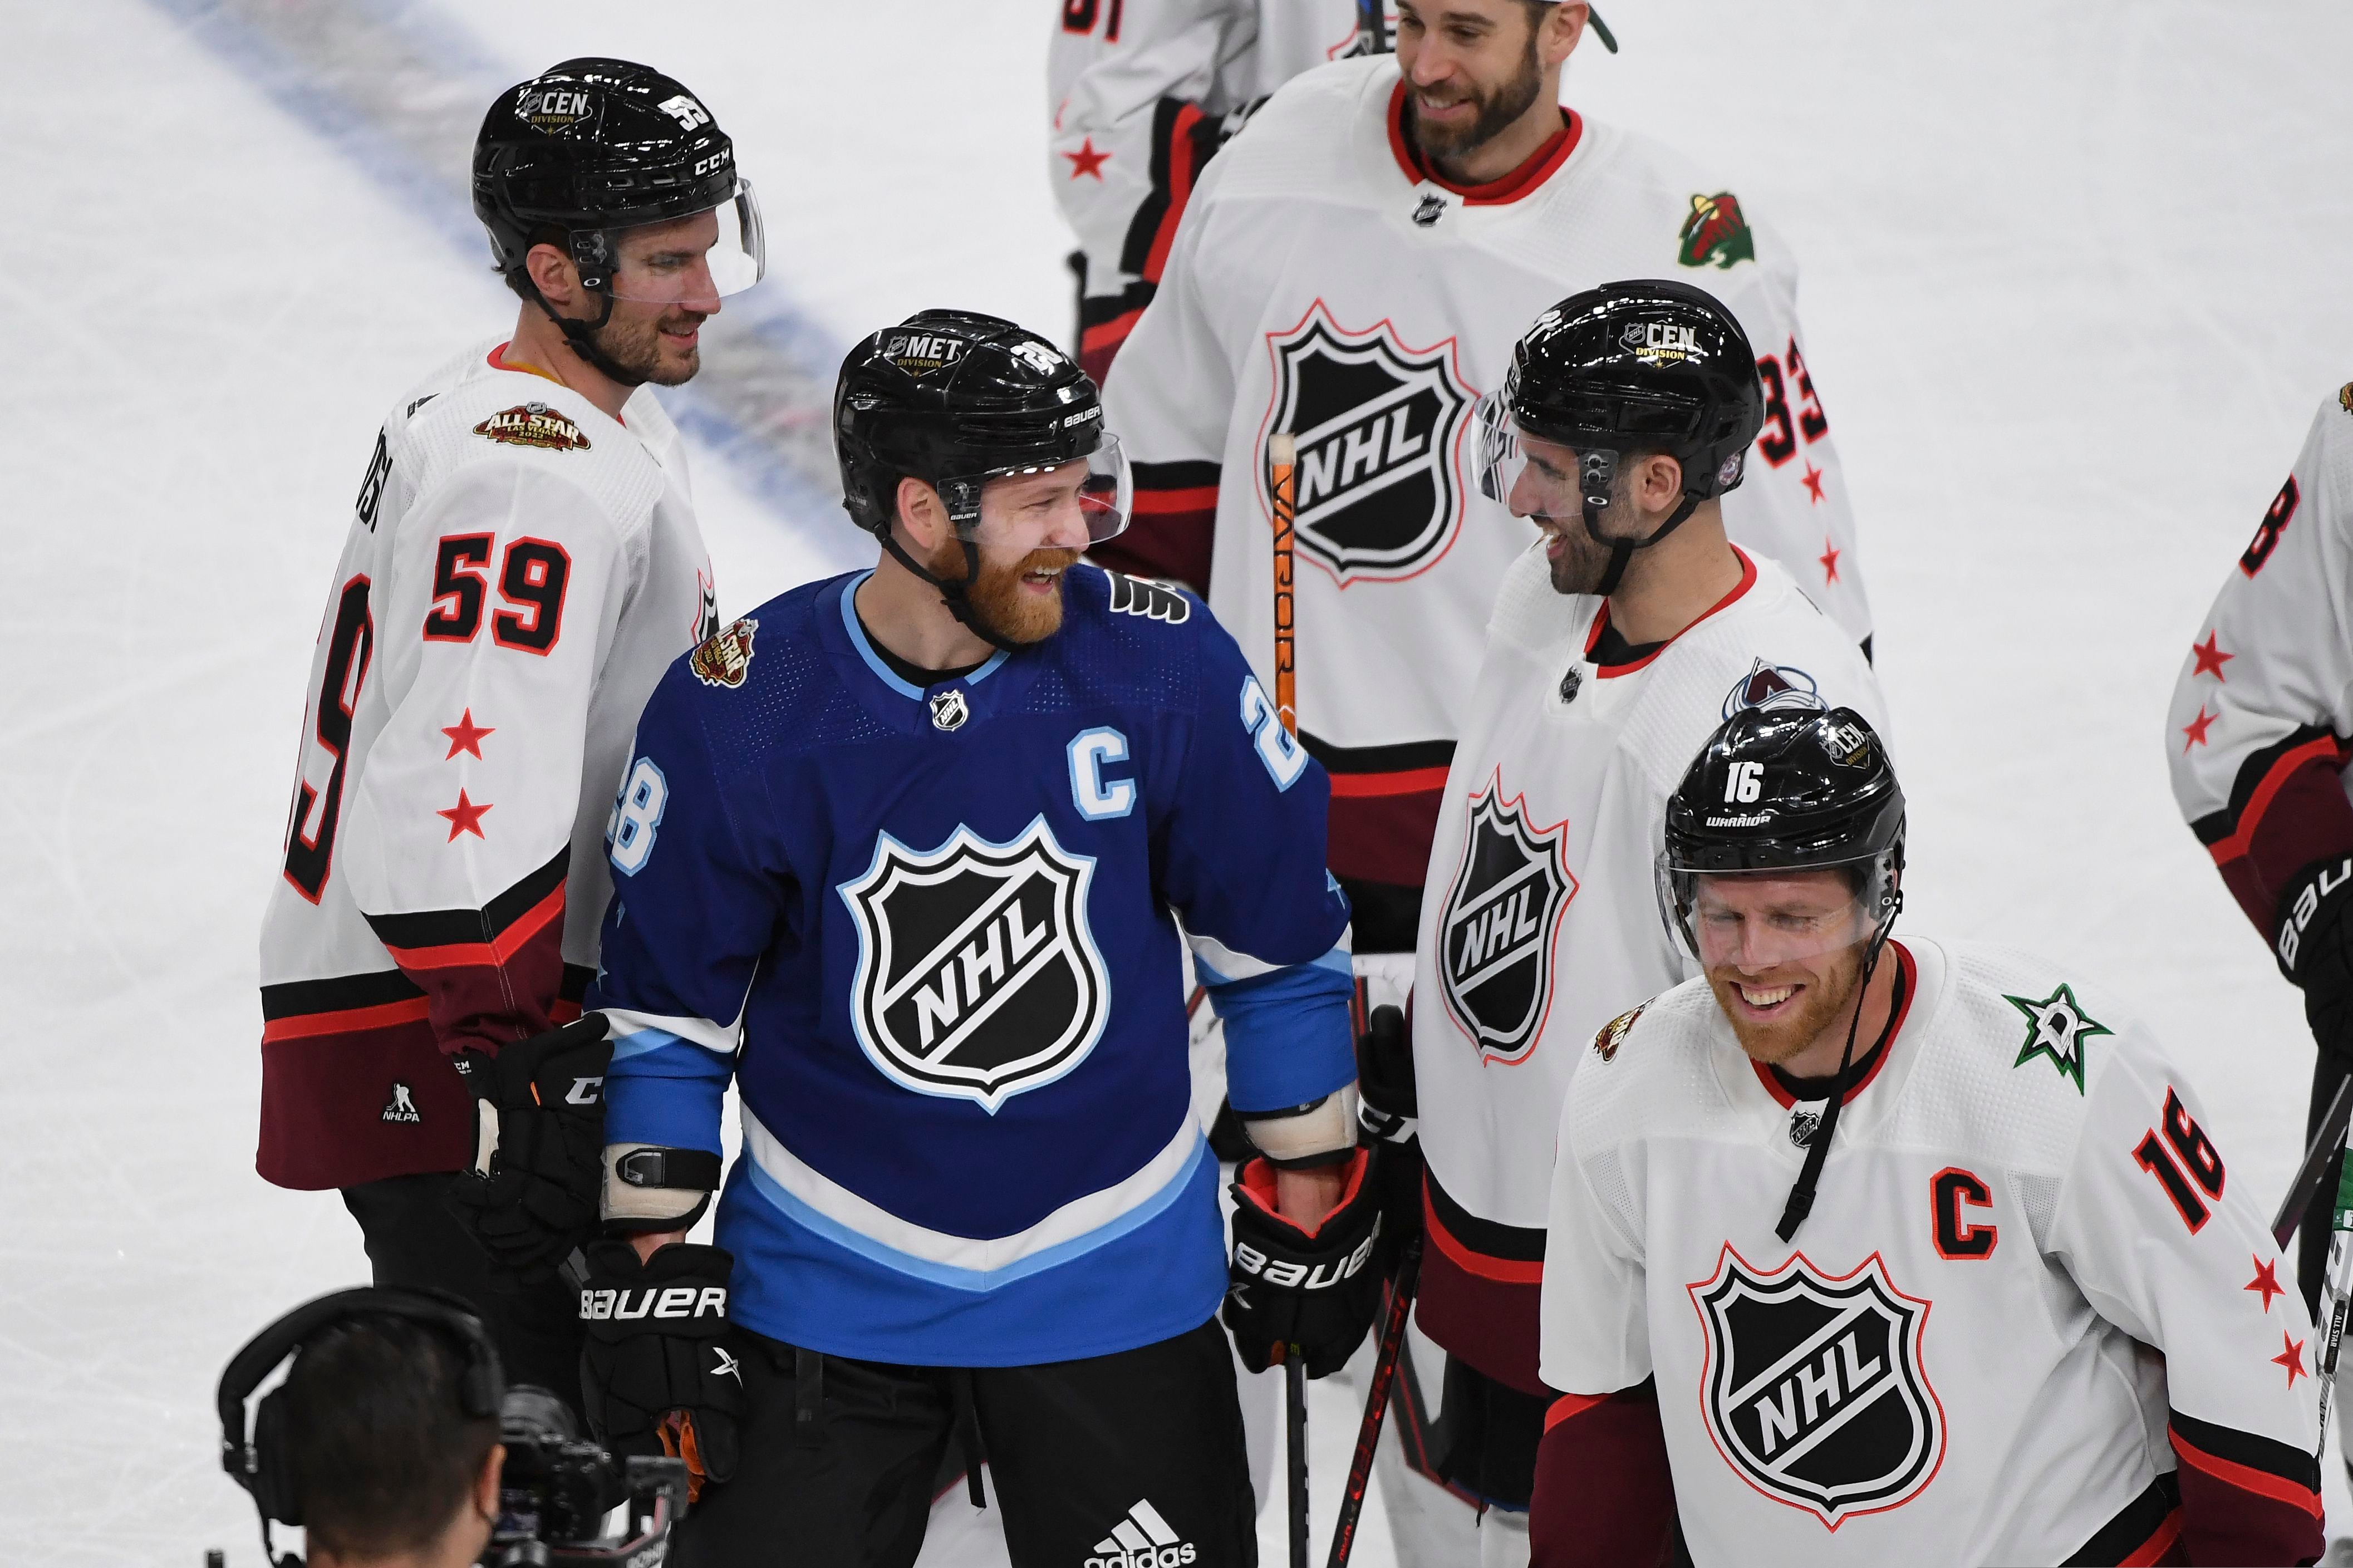 PHOTOS: 2022 NHL All-Star Game at T-Mobile Arena